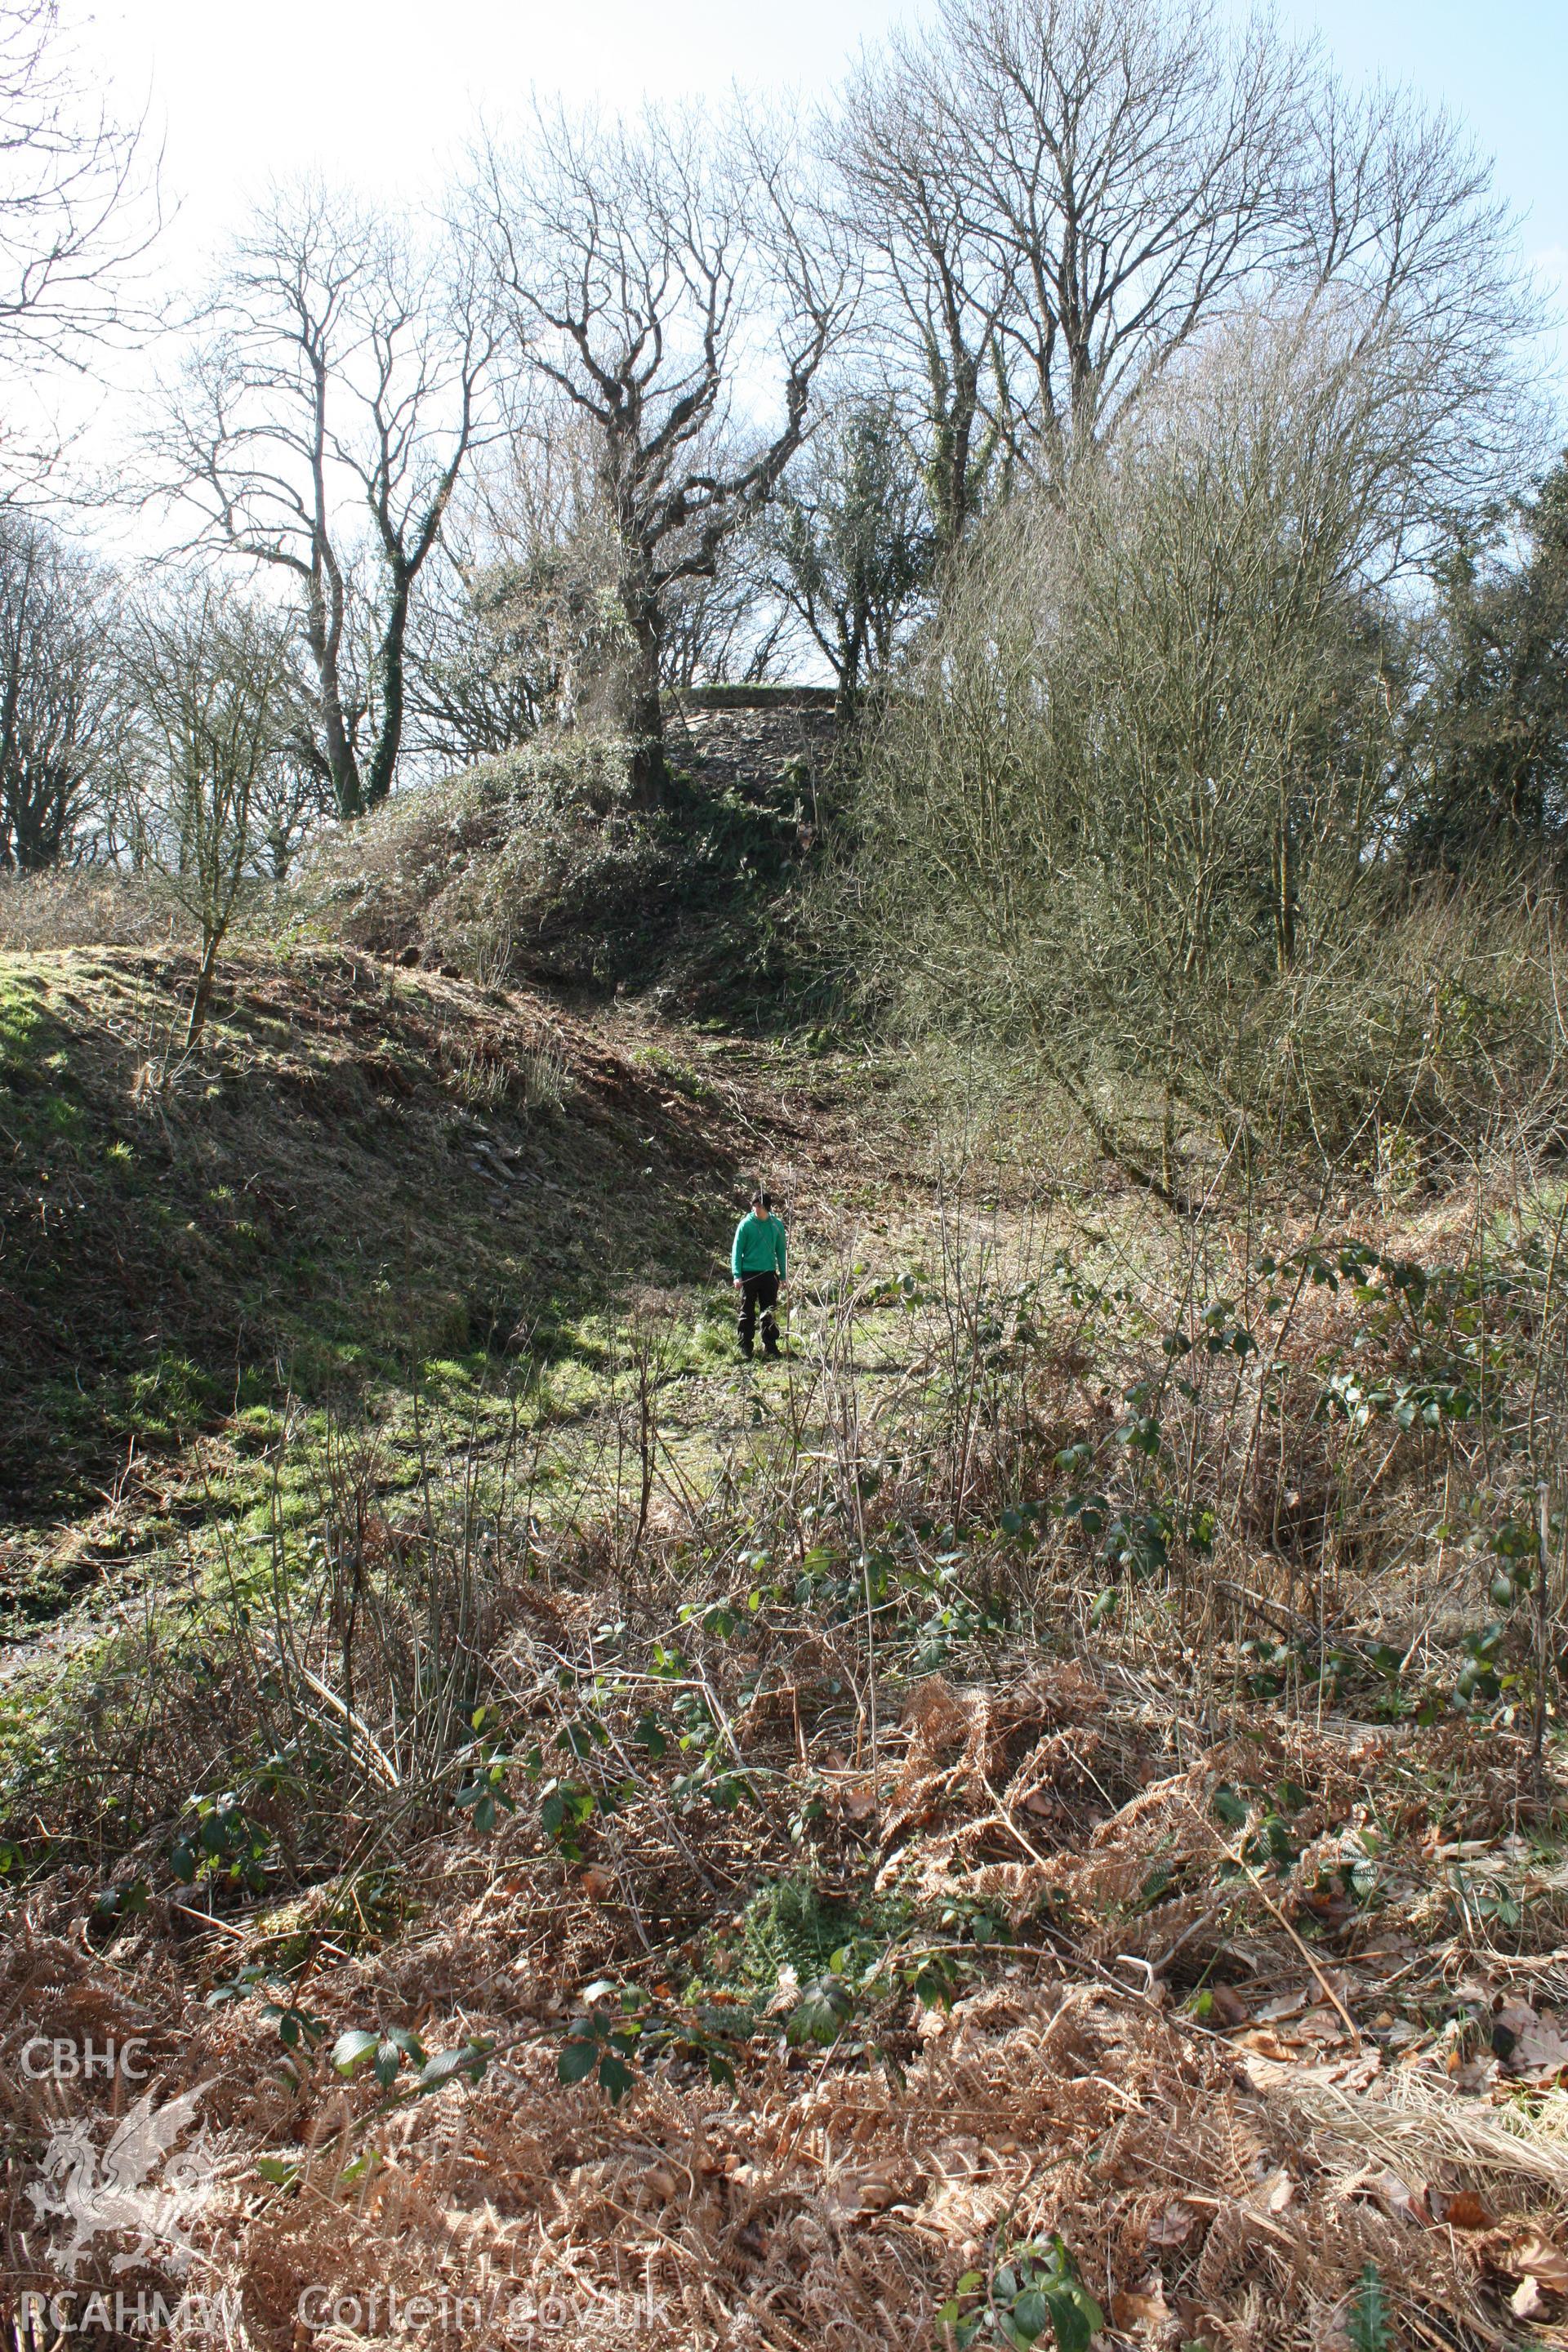 Nevern Castle, May 2010. View from the north-east across the ditch of the inner rampart to the castle motte and tower.